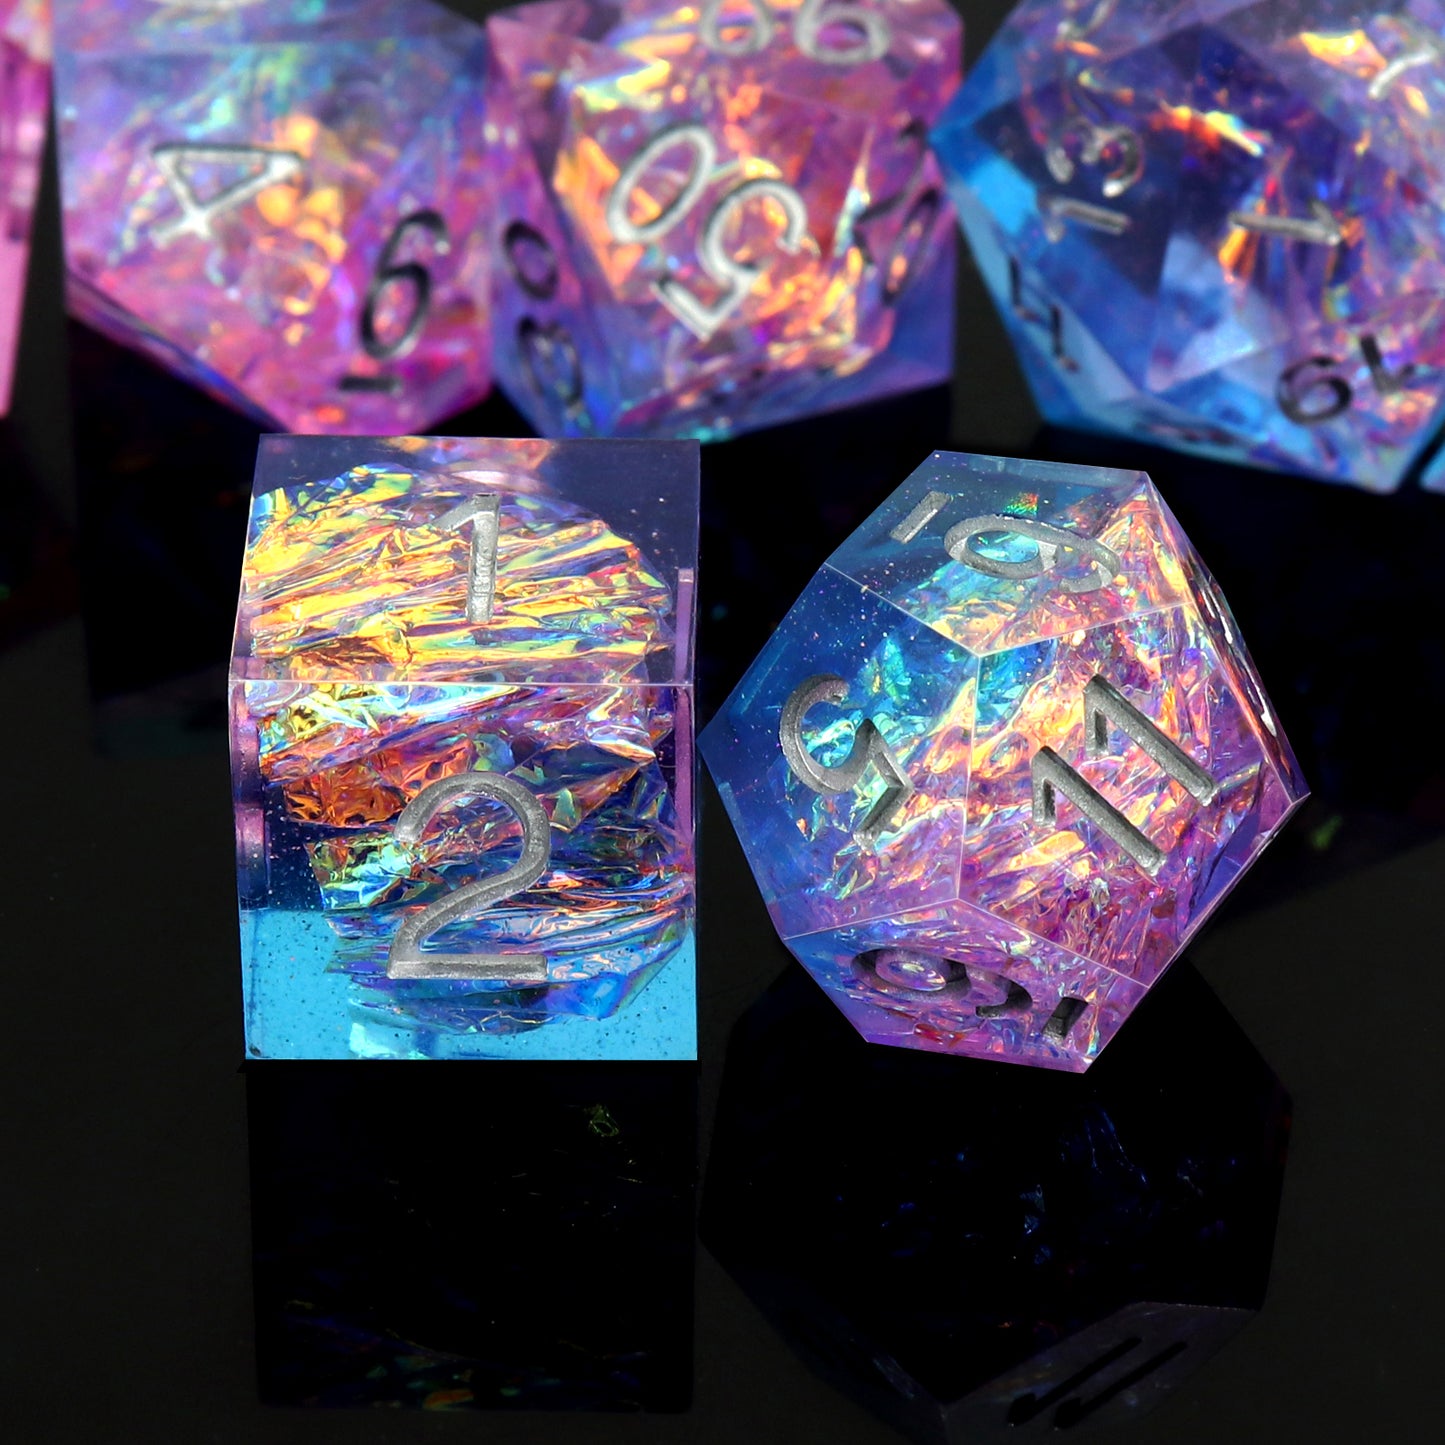 Haxtec Sparkling Sharp Edge Dice Set - Handmade Resin DND Dice with Iridescent Mylar Inclusion, Light Purple and Blue Color Mix-Enchanted Stardust